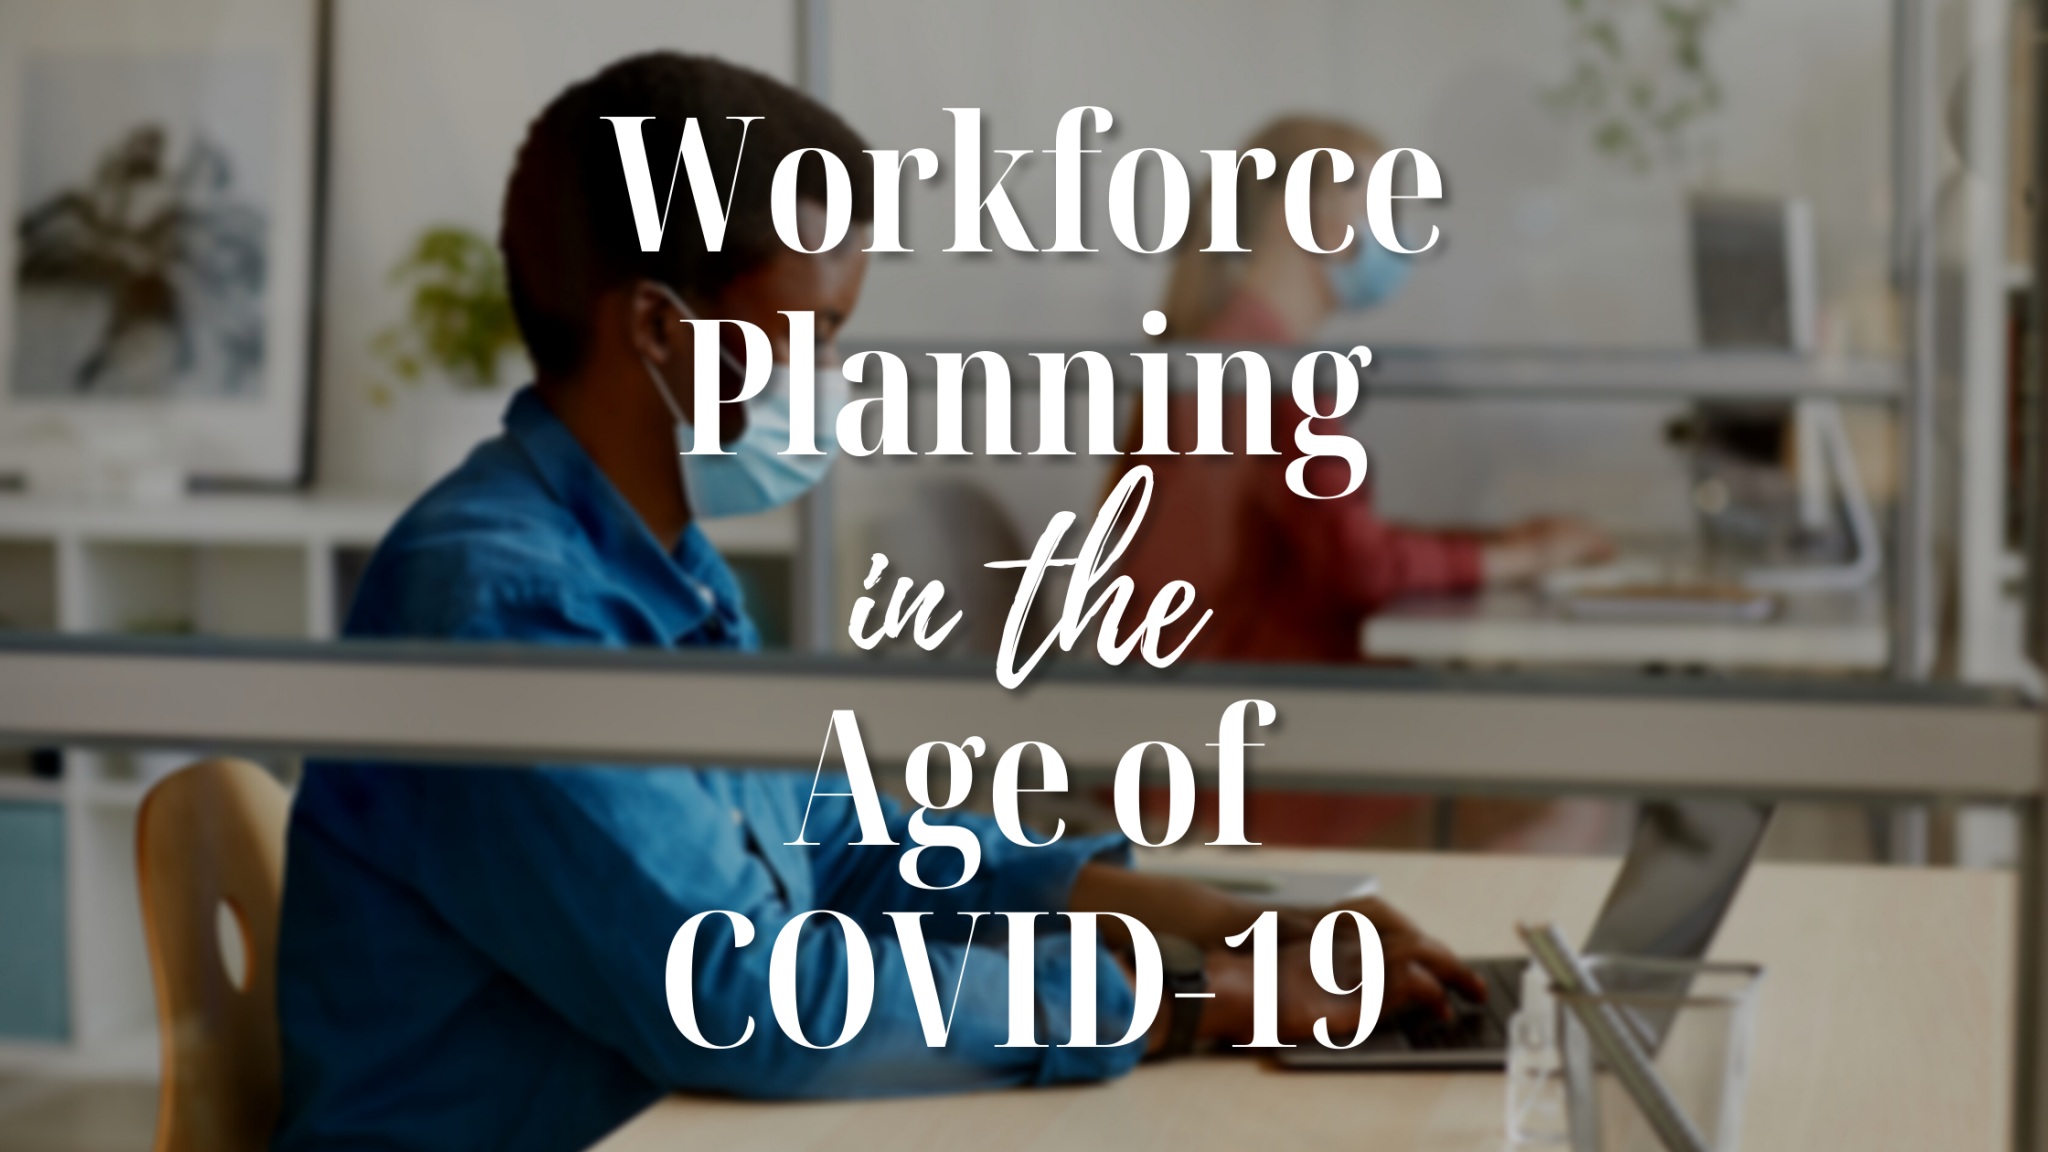 Workforce Planning in the Age of COVID-19